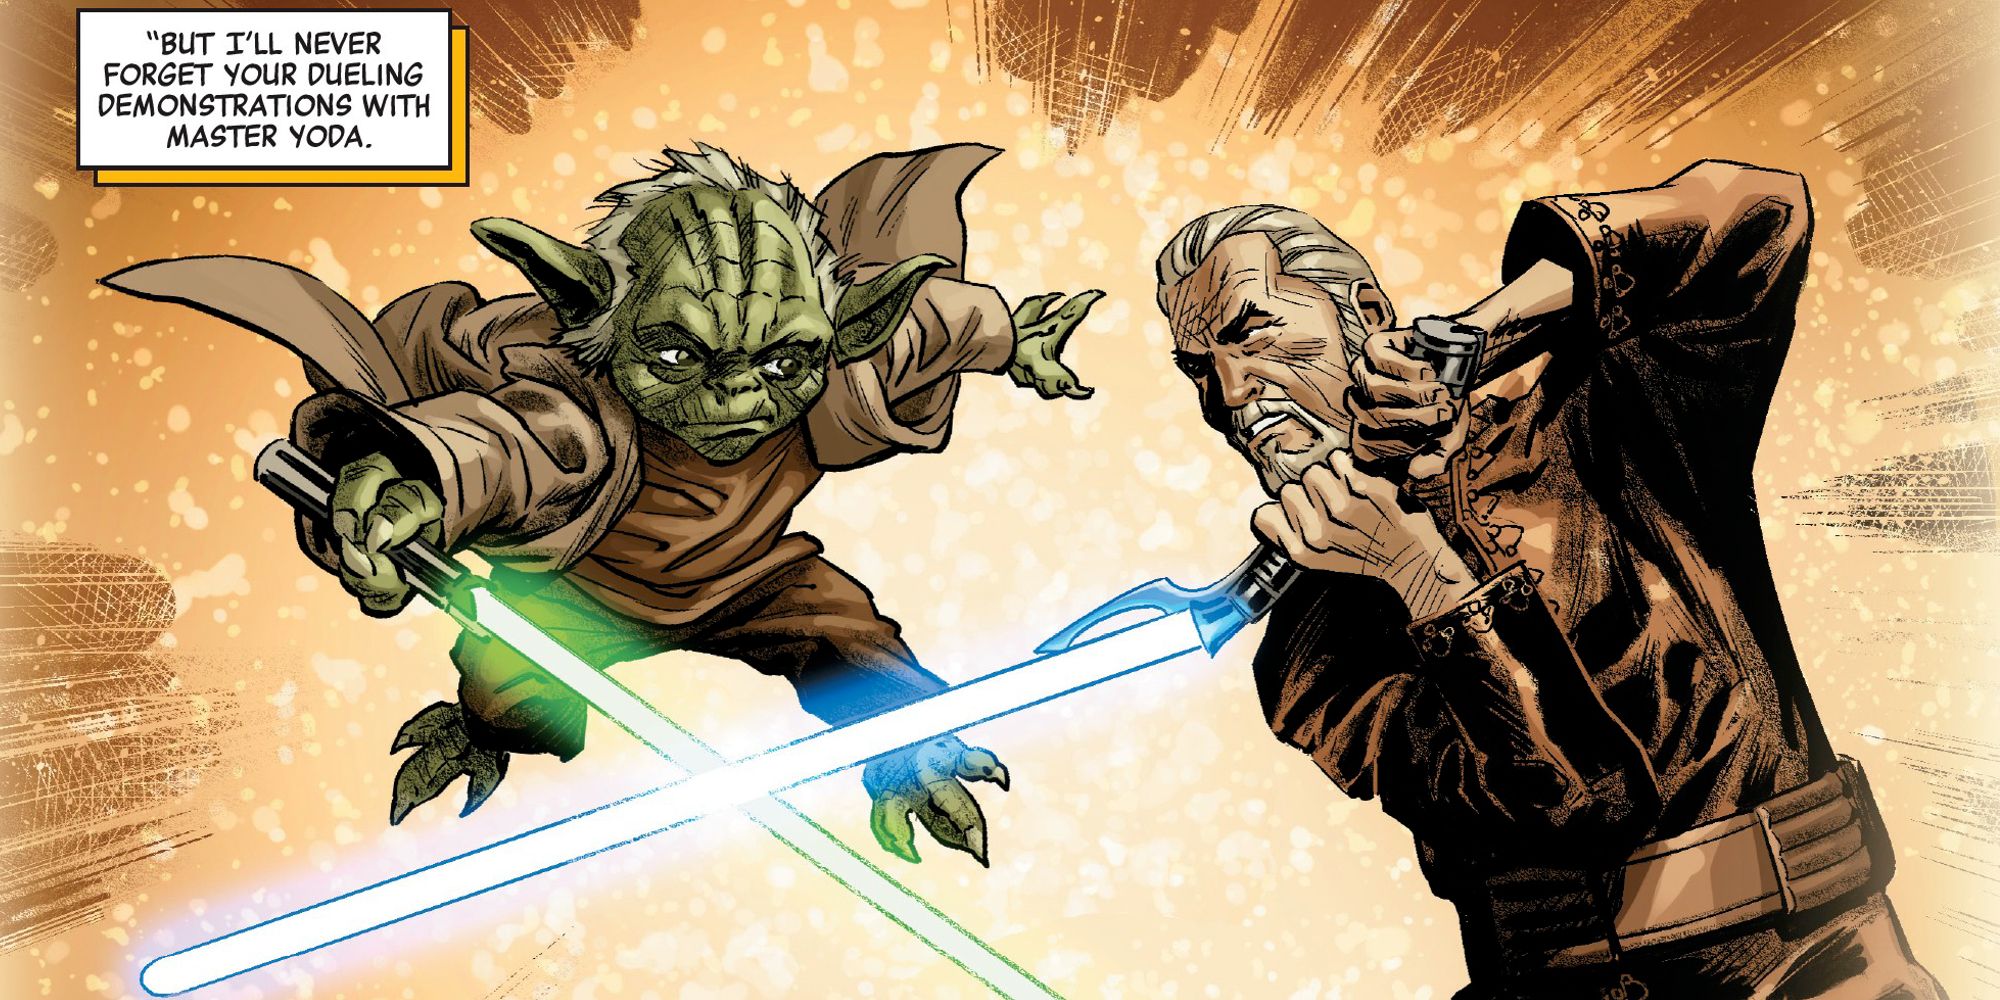 Count Dooku sparring with Master Yoda in Star Wars comics